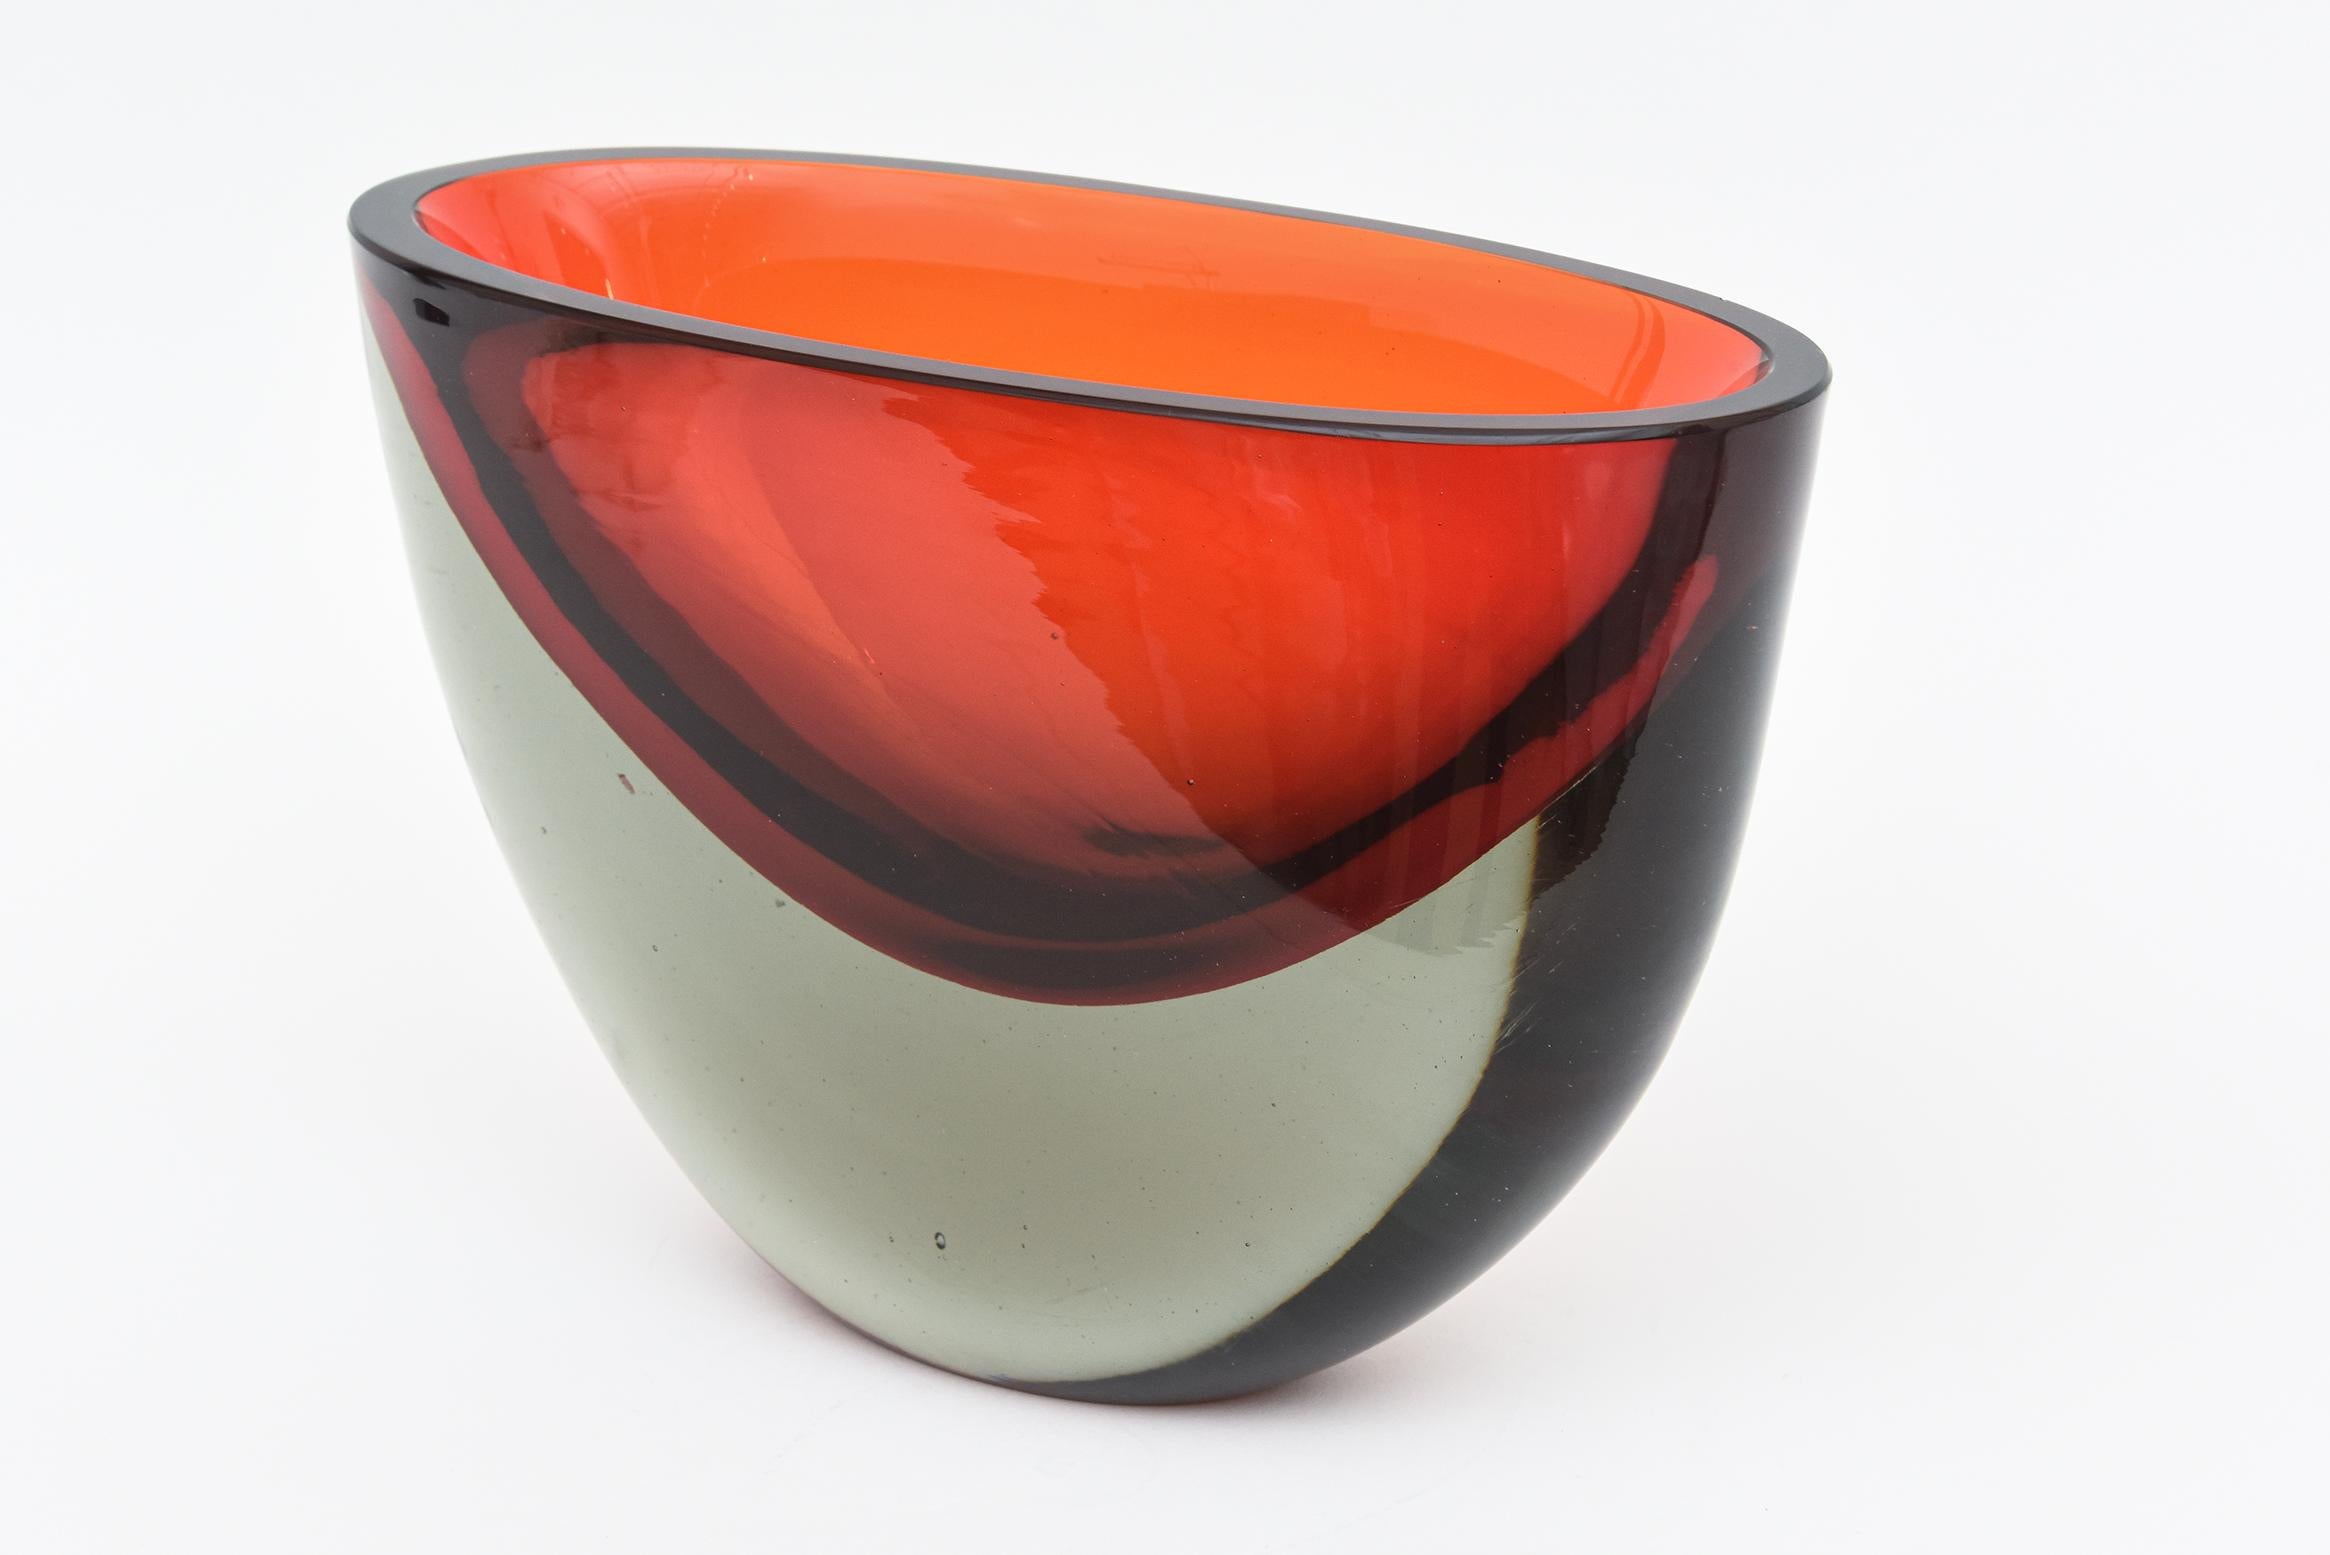 This very rare and heavy Italian Murano hand blown glass vase or vessel is by Antonio da Ros for Cenedese and is vintage from the 70's. It is flat cut polished top and has the sommerso technique ranging from gradients of red, red orange to dark gray